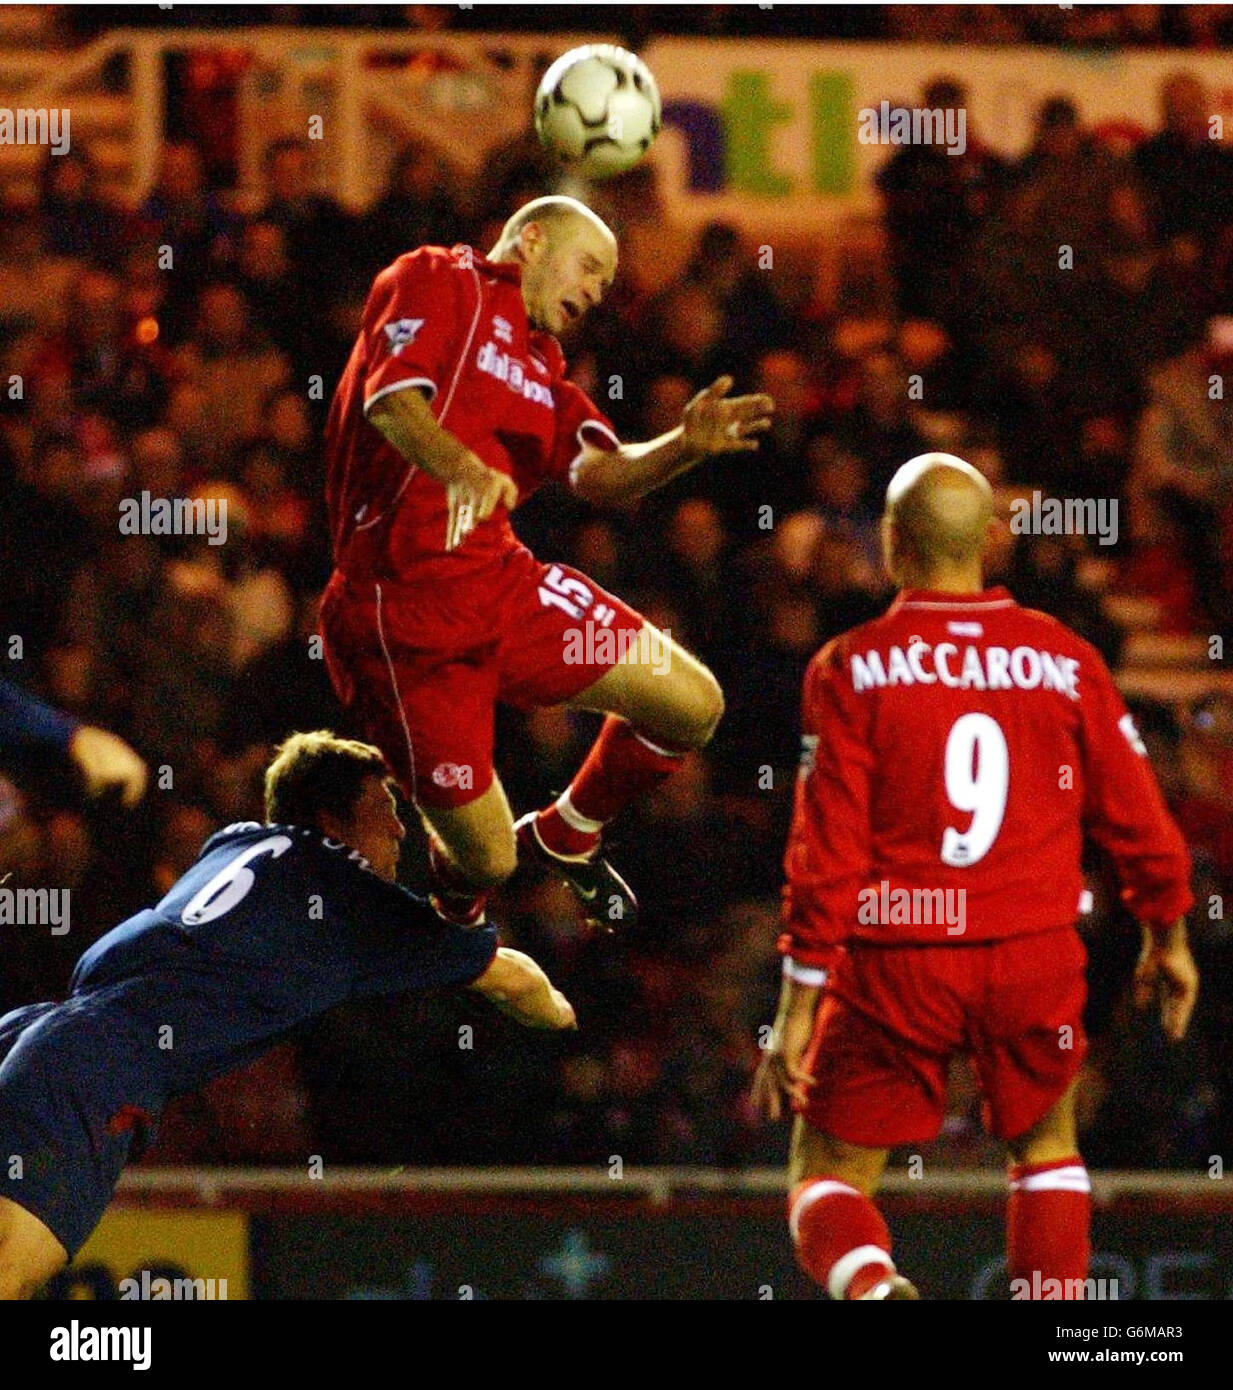 Middlesbrough's Danny Mills launches himself over Arjan De Zeeuw of Portsmouth, during the Barclaycard Premiership match at the Riverside Stadium, Middlesbrough. Final score: Middlesbrough nil, Portsmouth nil. Stock Photo